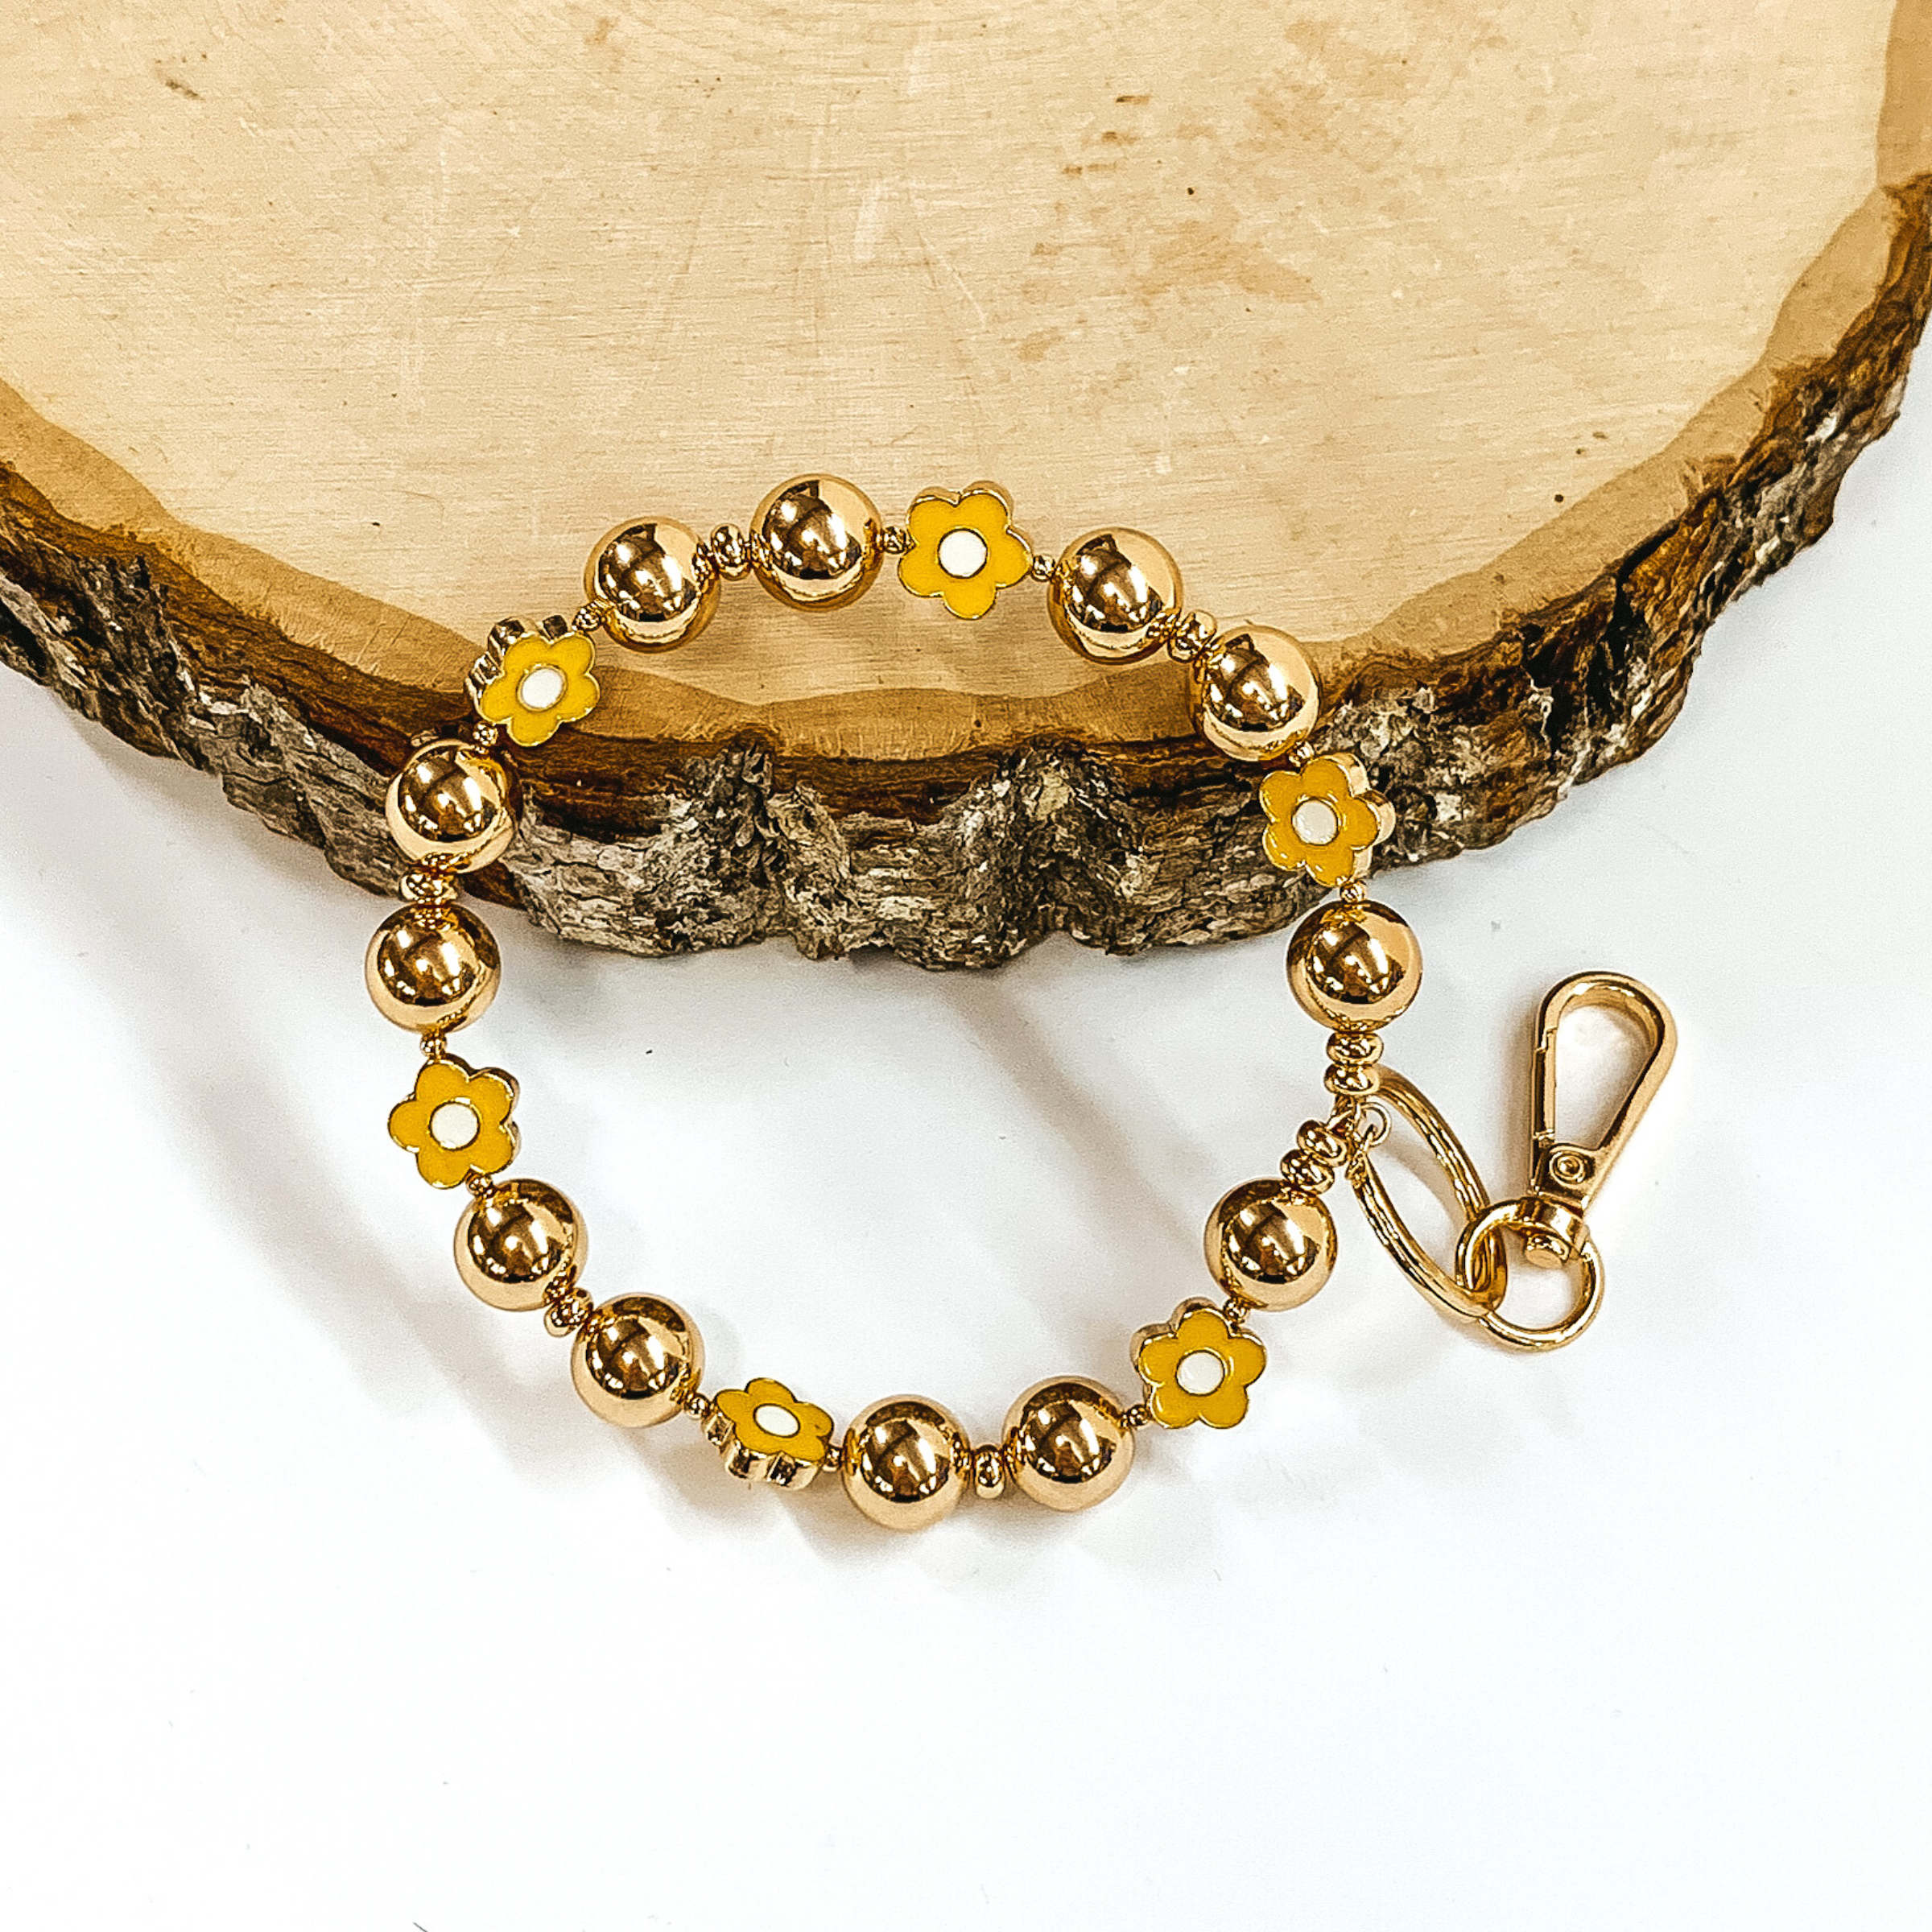 Gold beaded bracelet with yellow flower spacers. There is a gold key ring and clasp on one end of the bangle. It is pictured laying against a piece of wood on a white background.